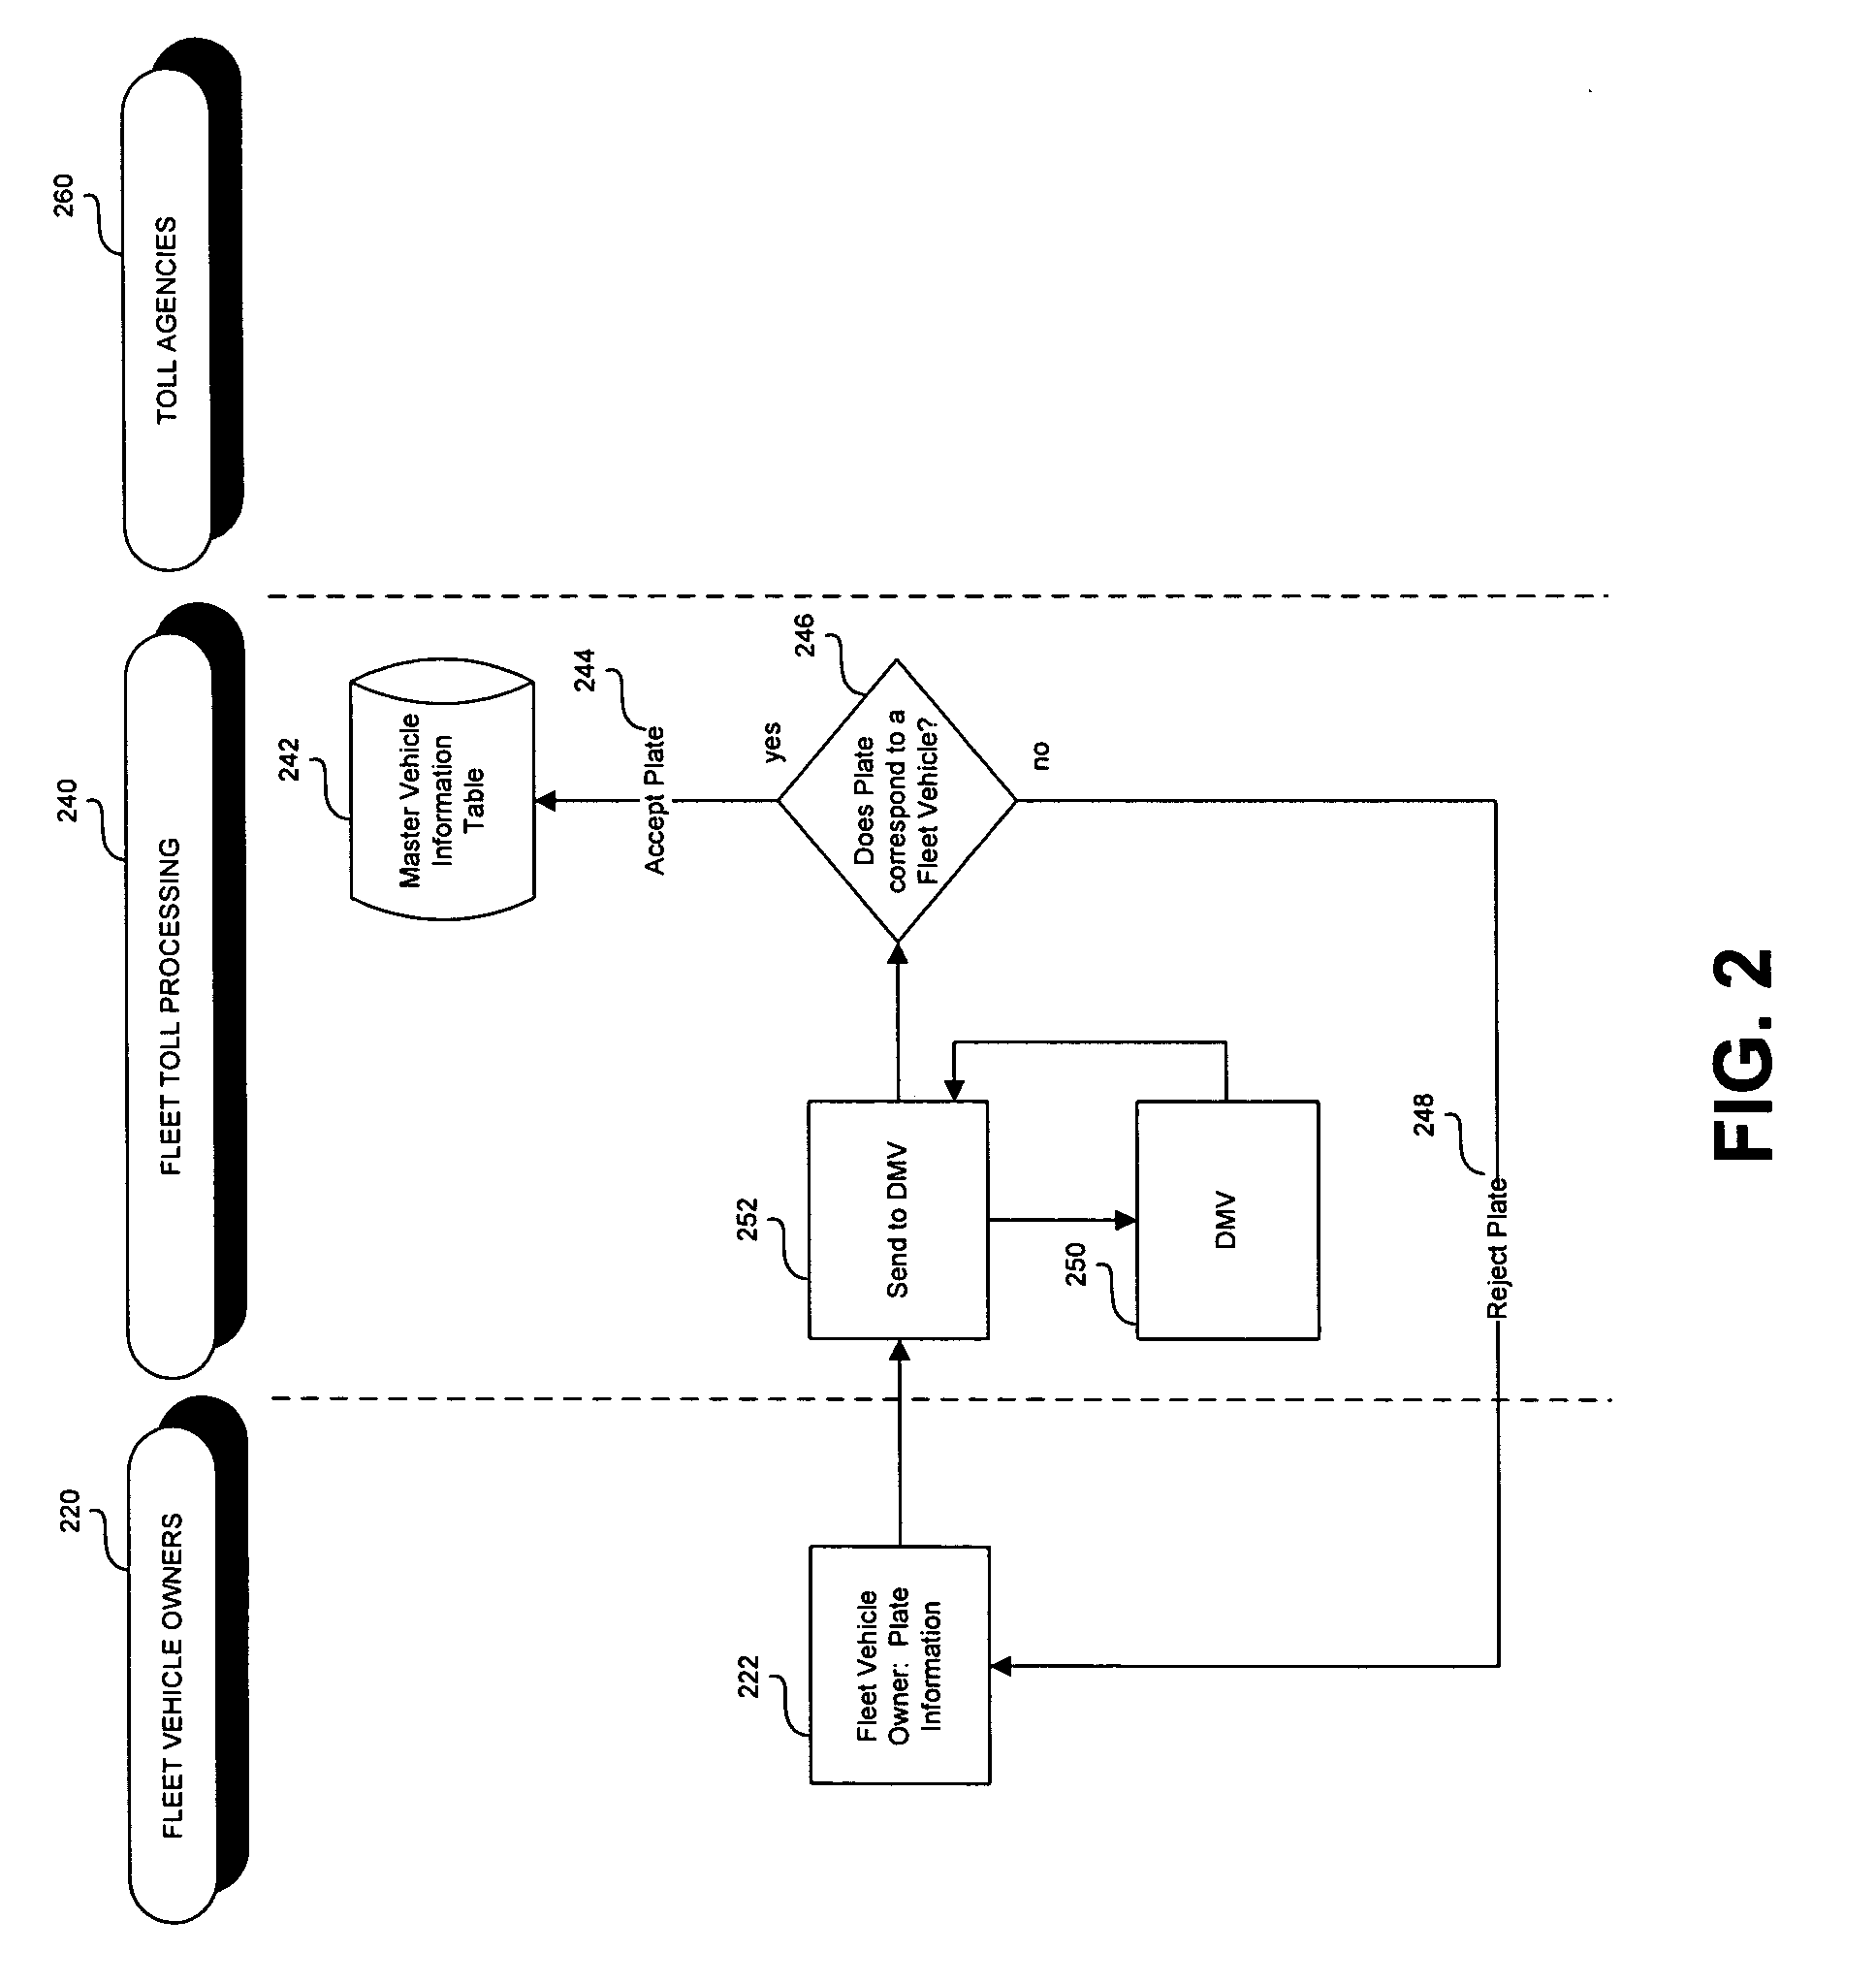 System and method for processing toll transactions